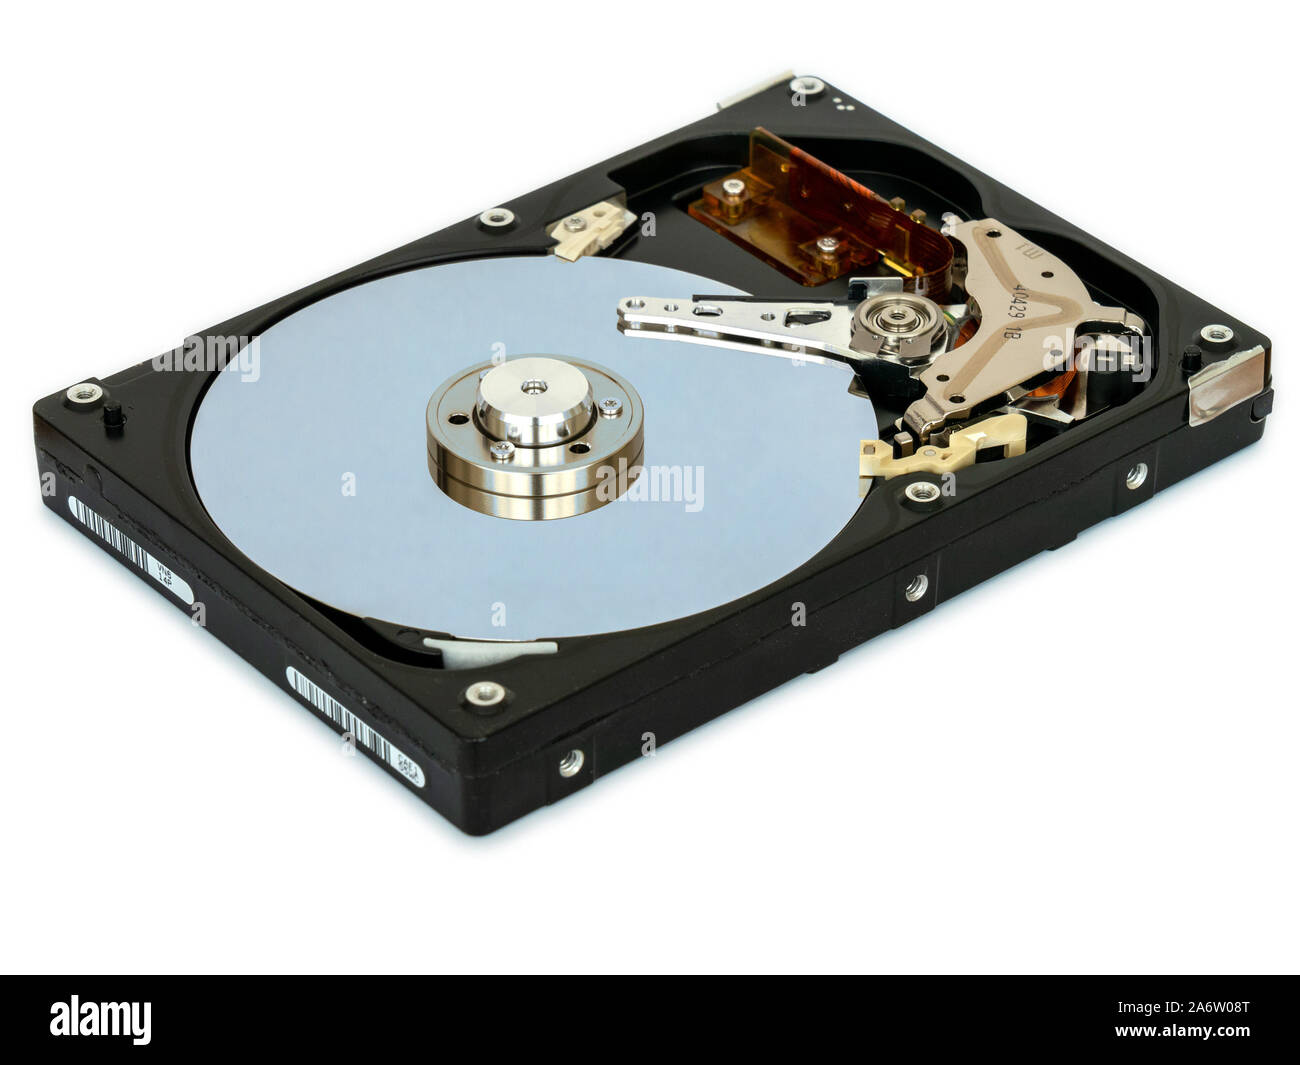 Inside a dismantled 3.5 inch computer hard-disk data storage drive showing platter and read write head. Stock Photo